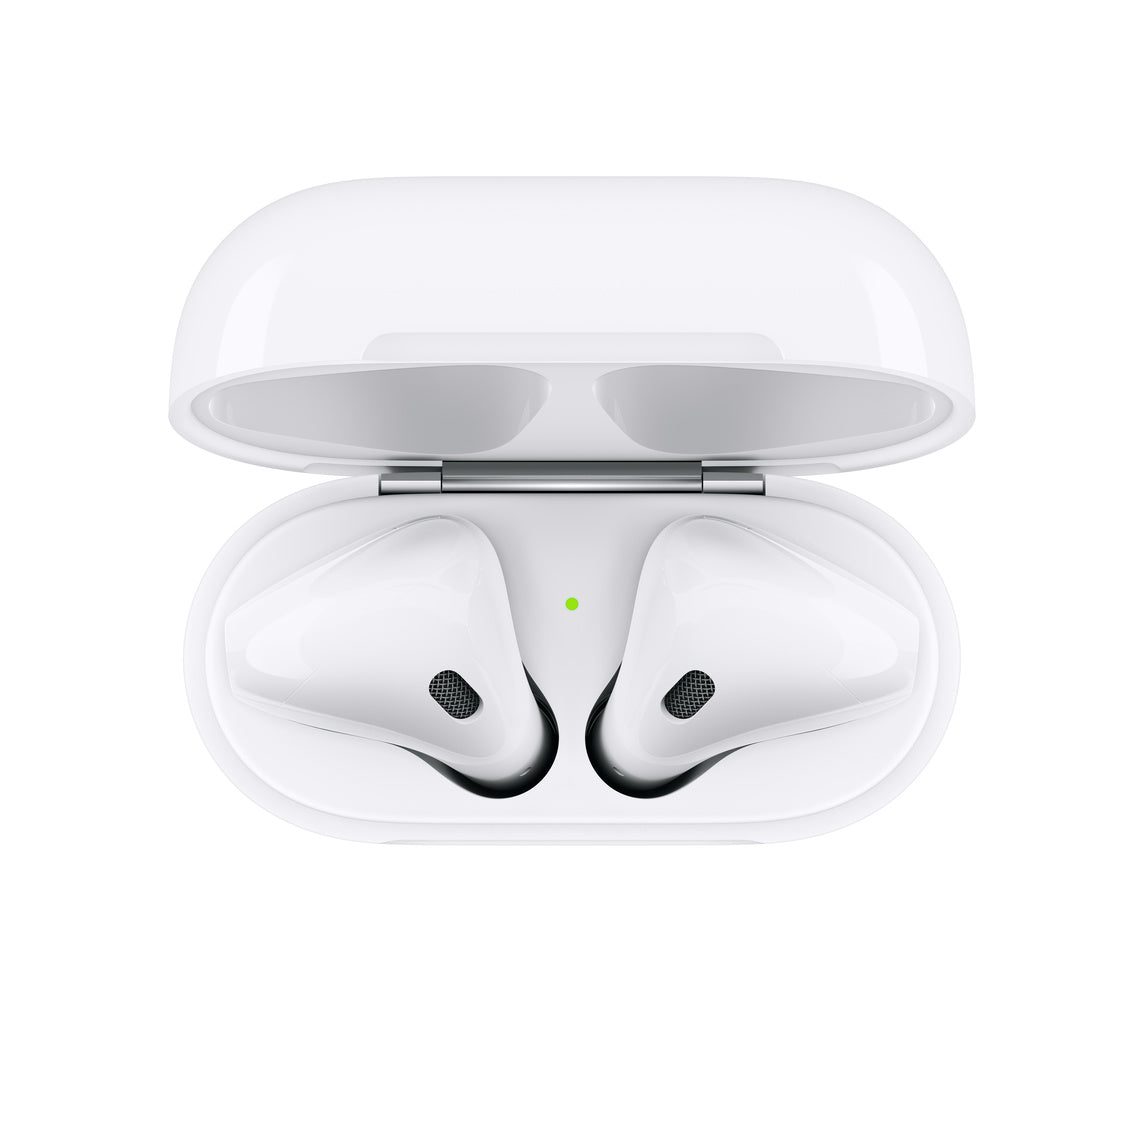 Apple AirPods 2nd Generation with Wired Charging Case - Refurbished Good